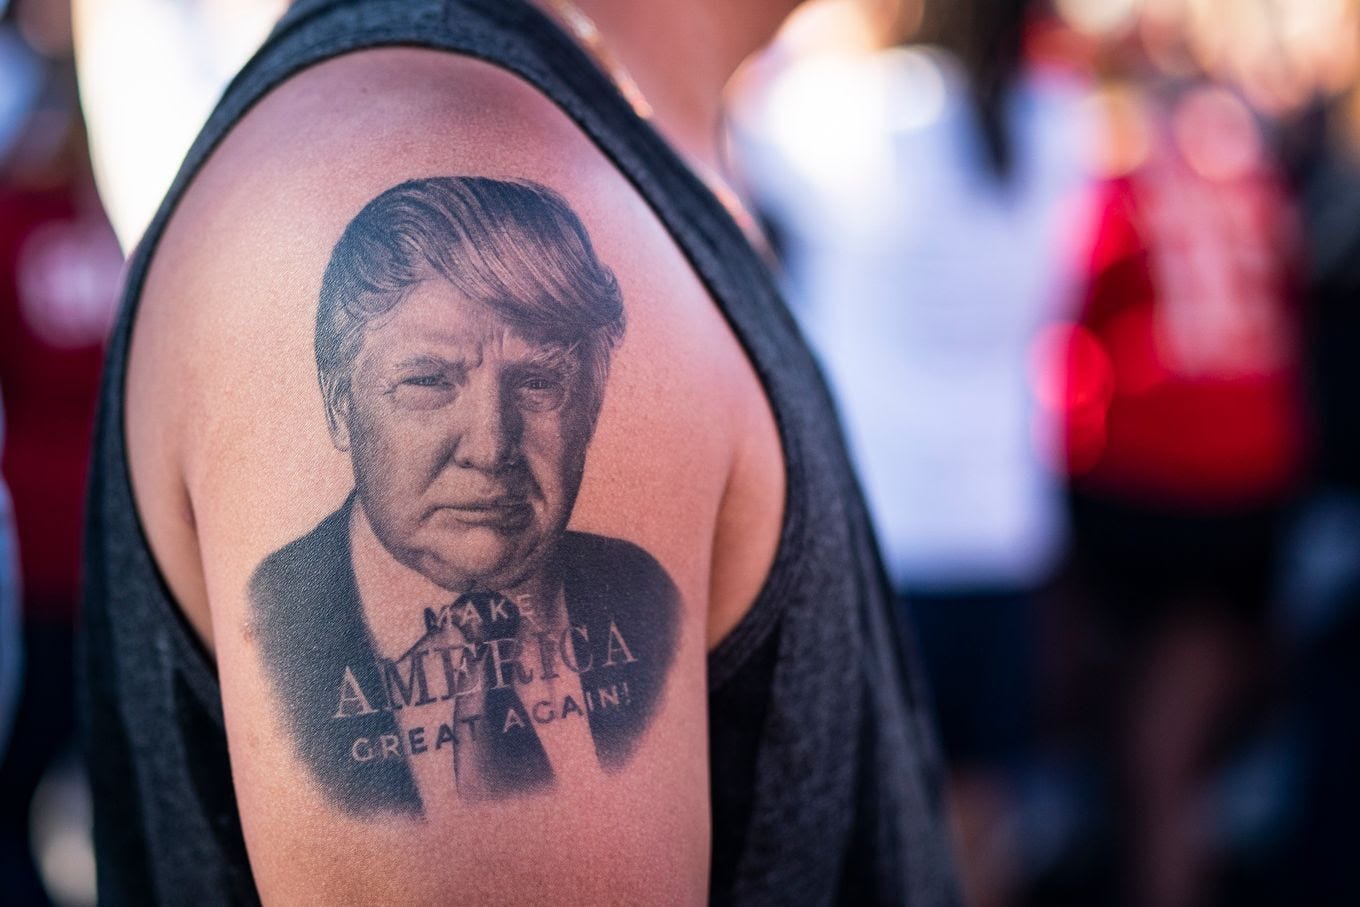 A tattoo of former president Donald Trump is seen on the arm of a supporter as Trump speaks at a campaign rally March 25 in Waco, Tex. (Jabin Botsford/The Washington Post)